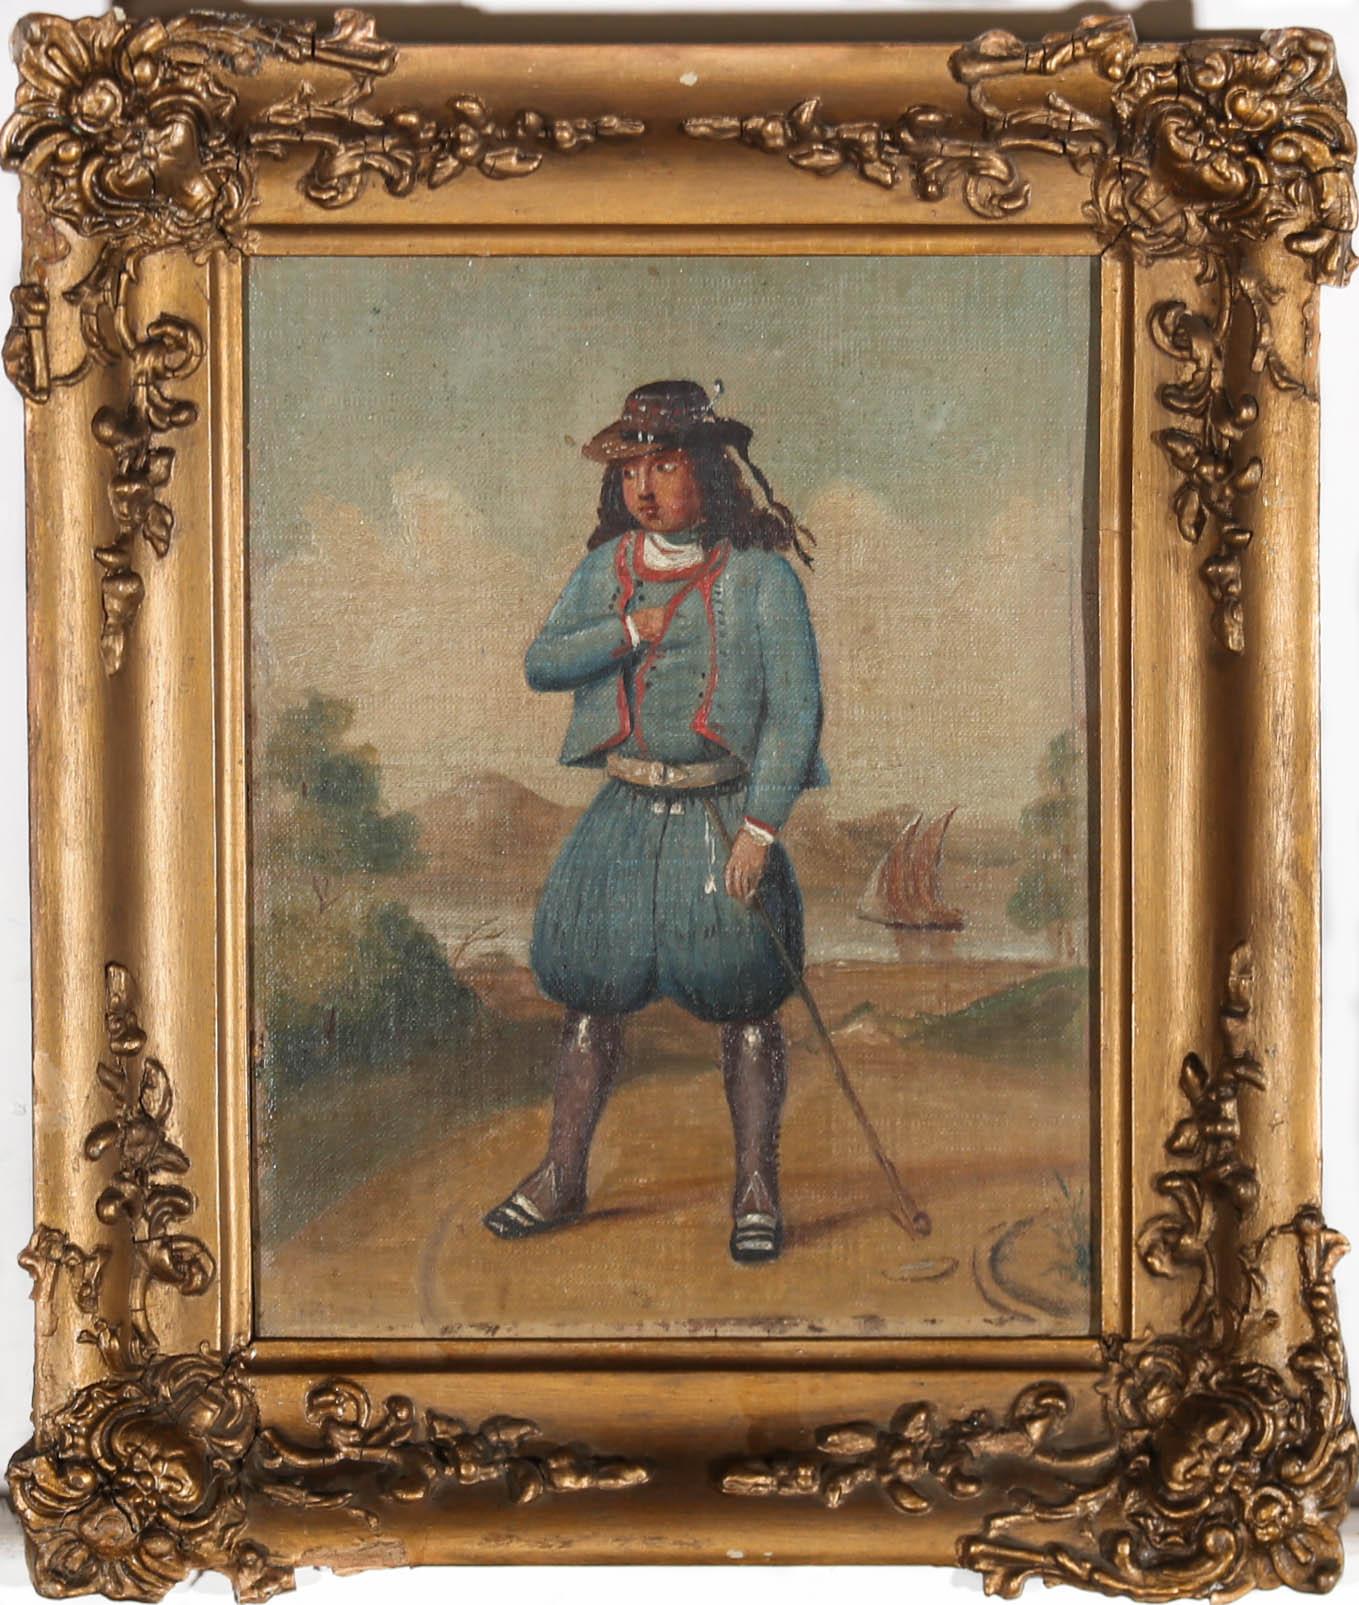 Unknown Figurative Painting - 19th Century Oil - Peasant Man